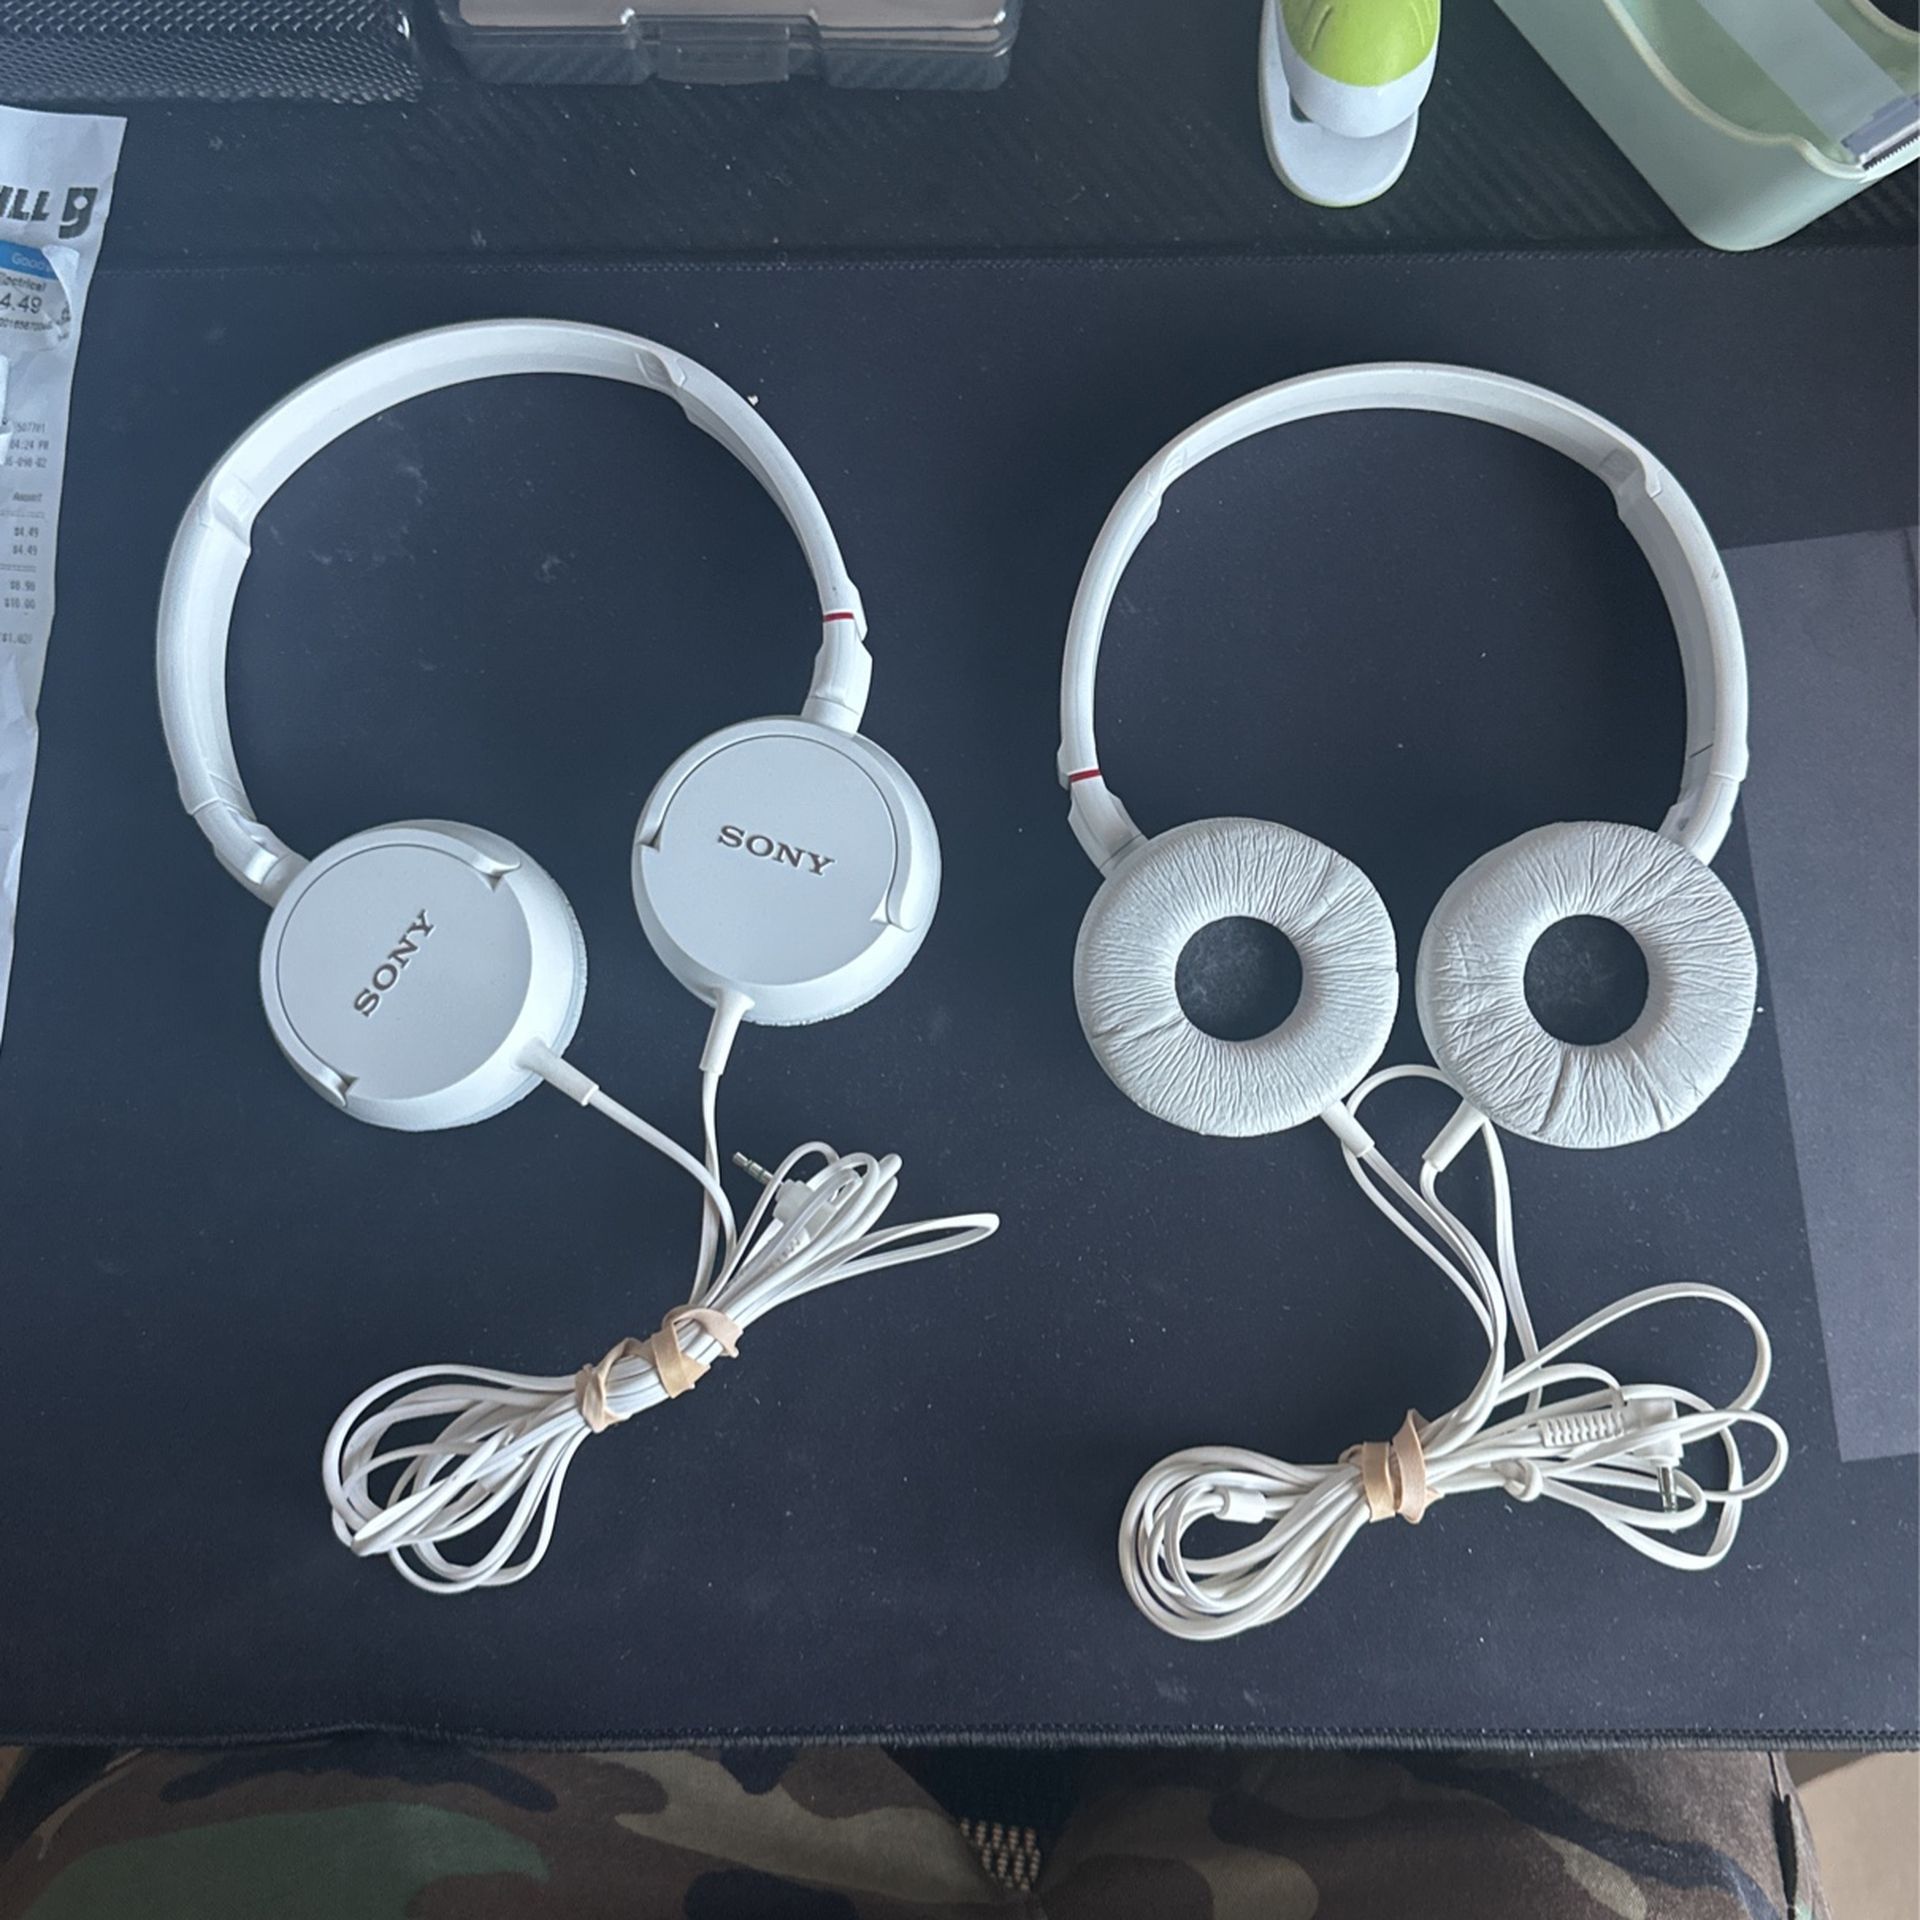  2 Sony MDR ZX100 Original White Headphones - Tested